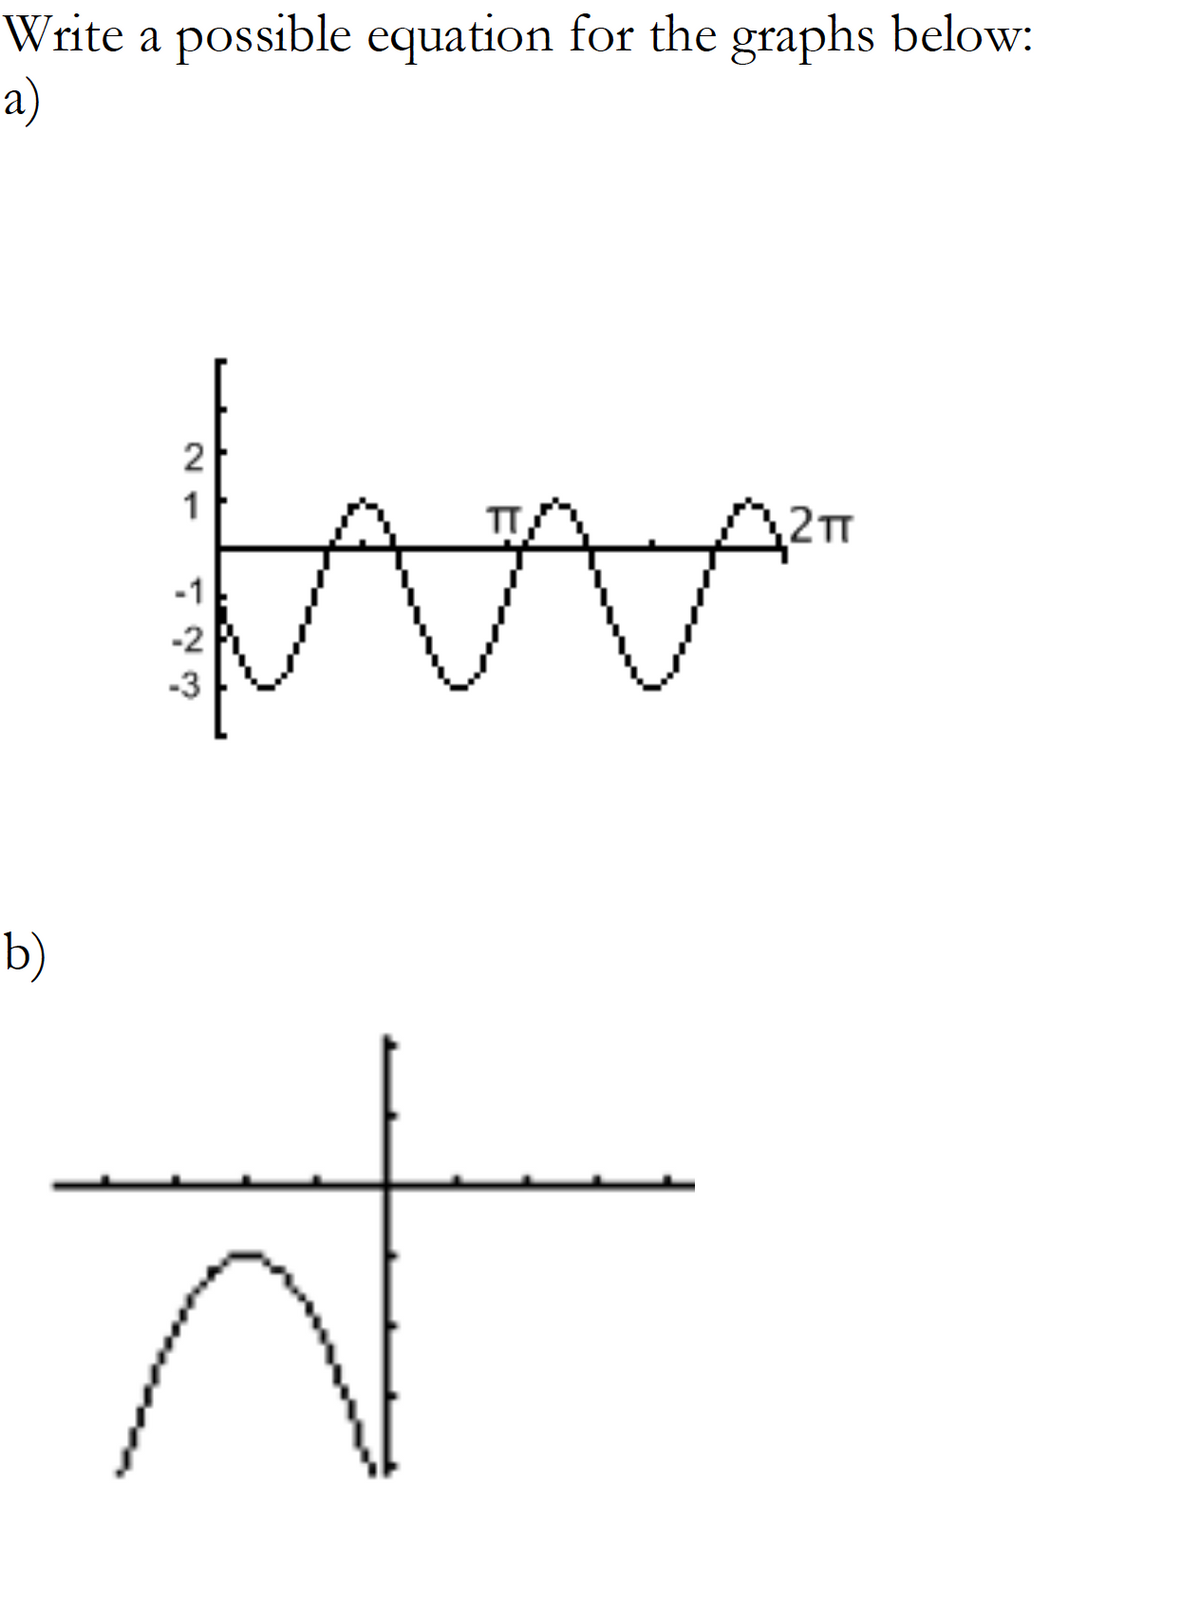 Write a possible equation for the graphs below:
a)
1
TT
2TT
-1
-3
b)
